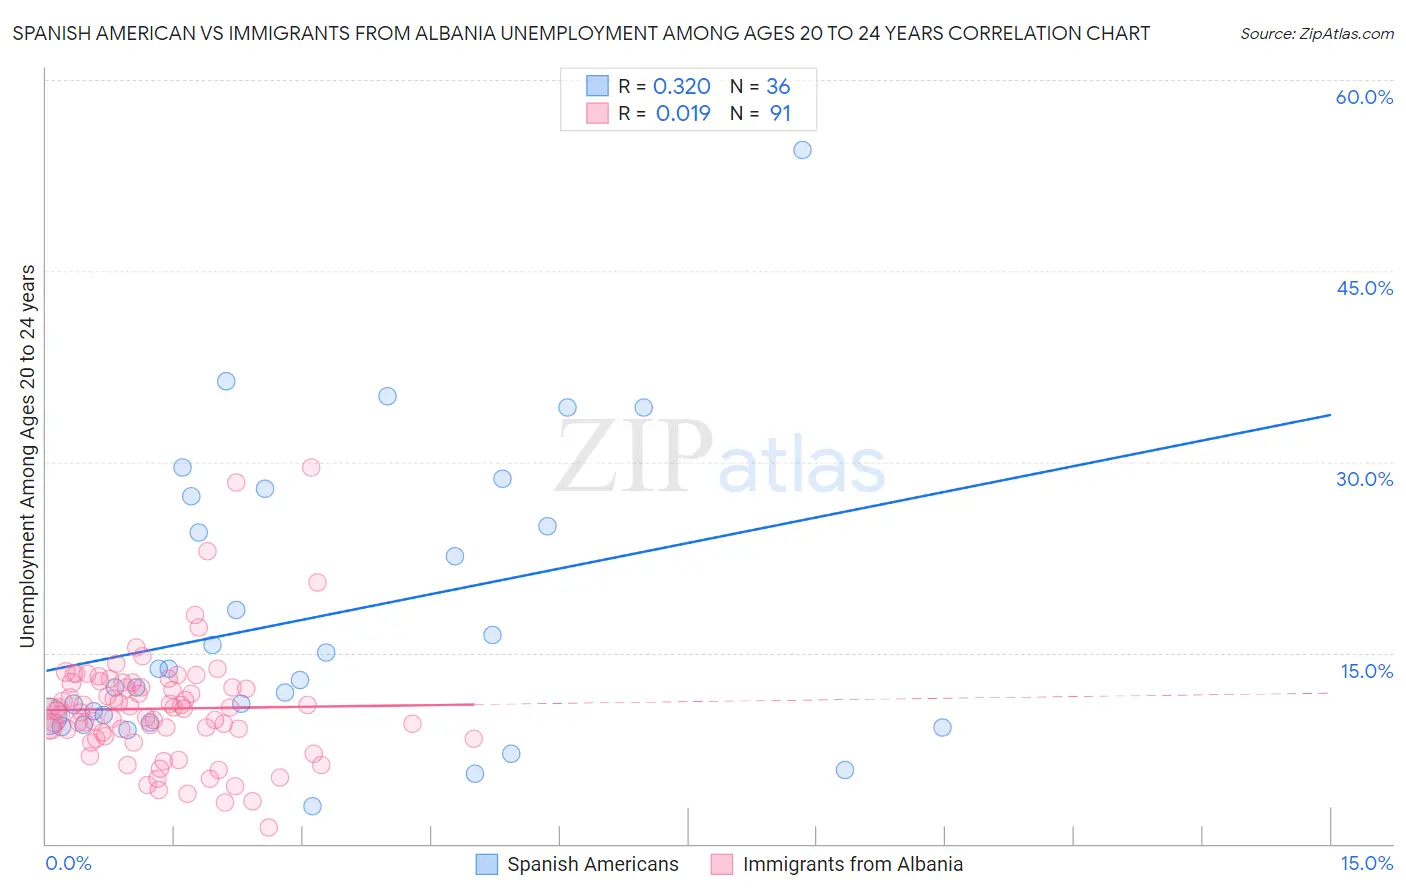 Spanish American vs Immigrants from Albania Unemployment Among Ages 20 to 24 years